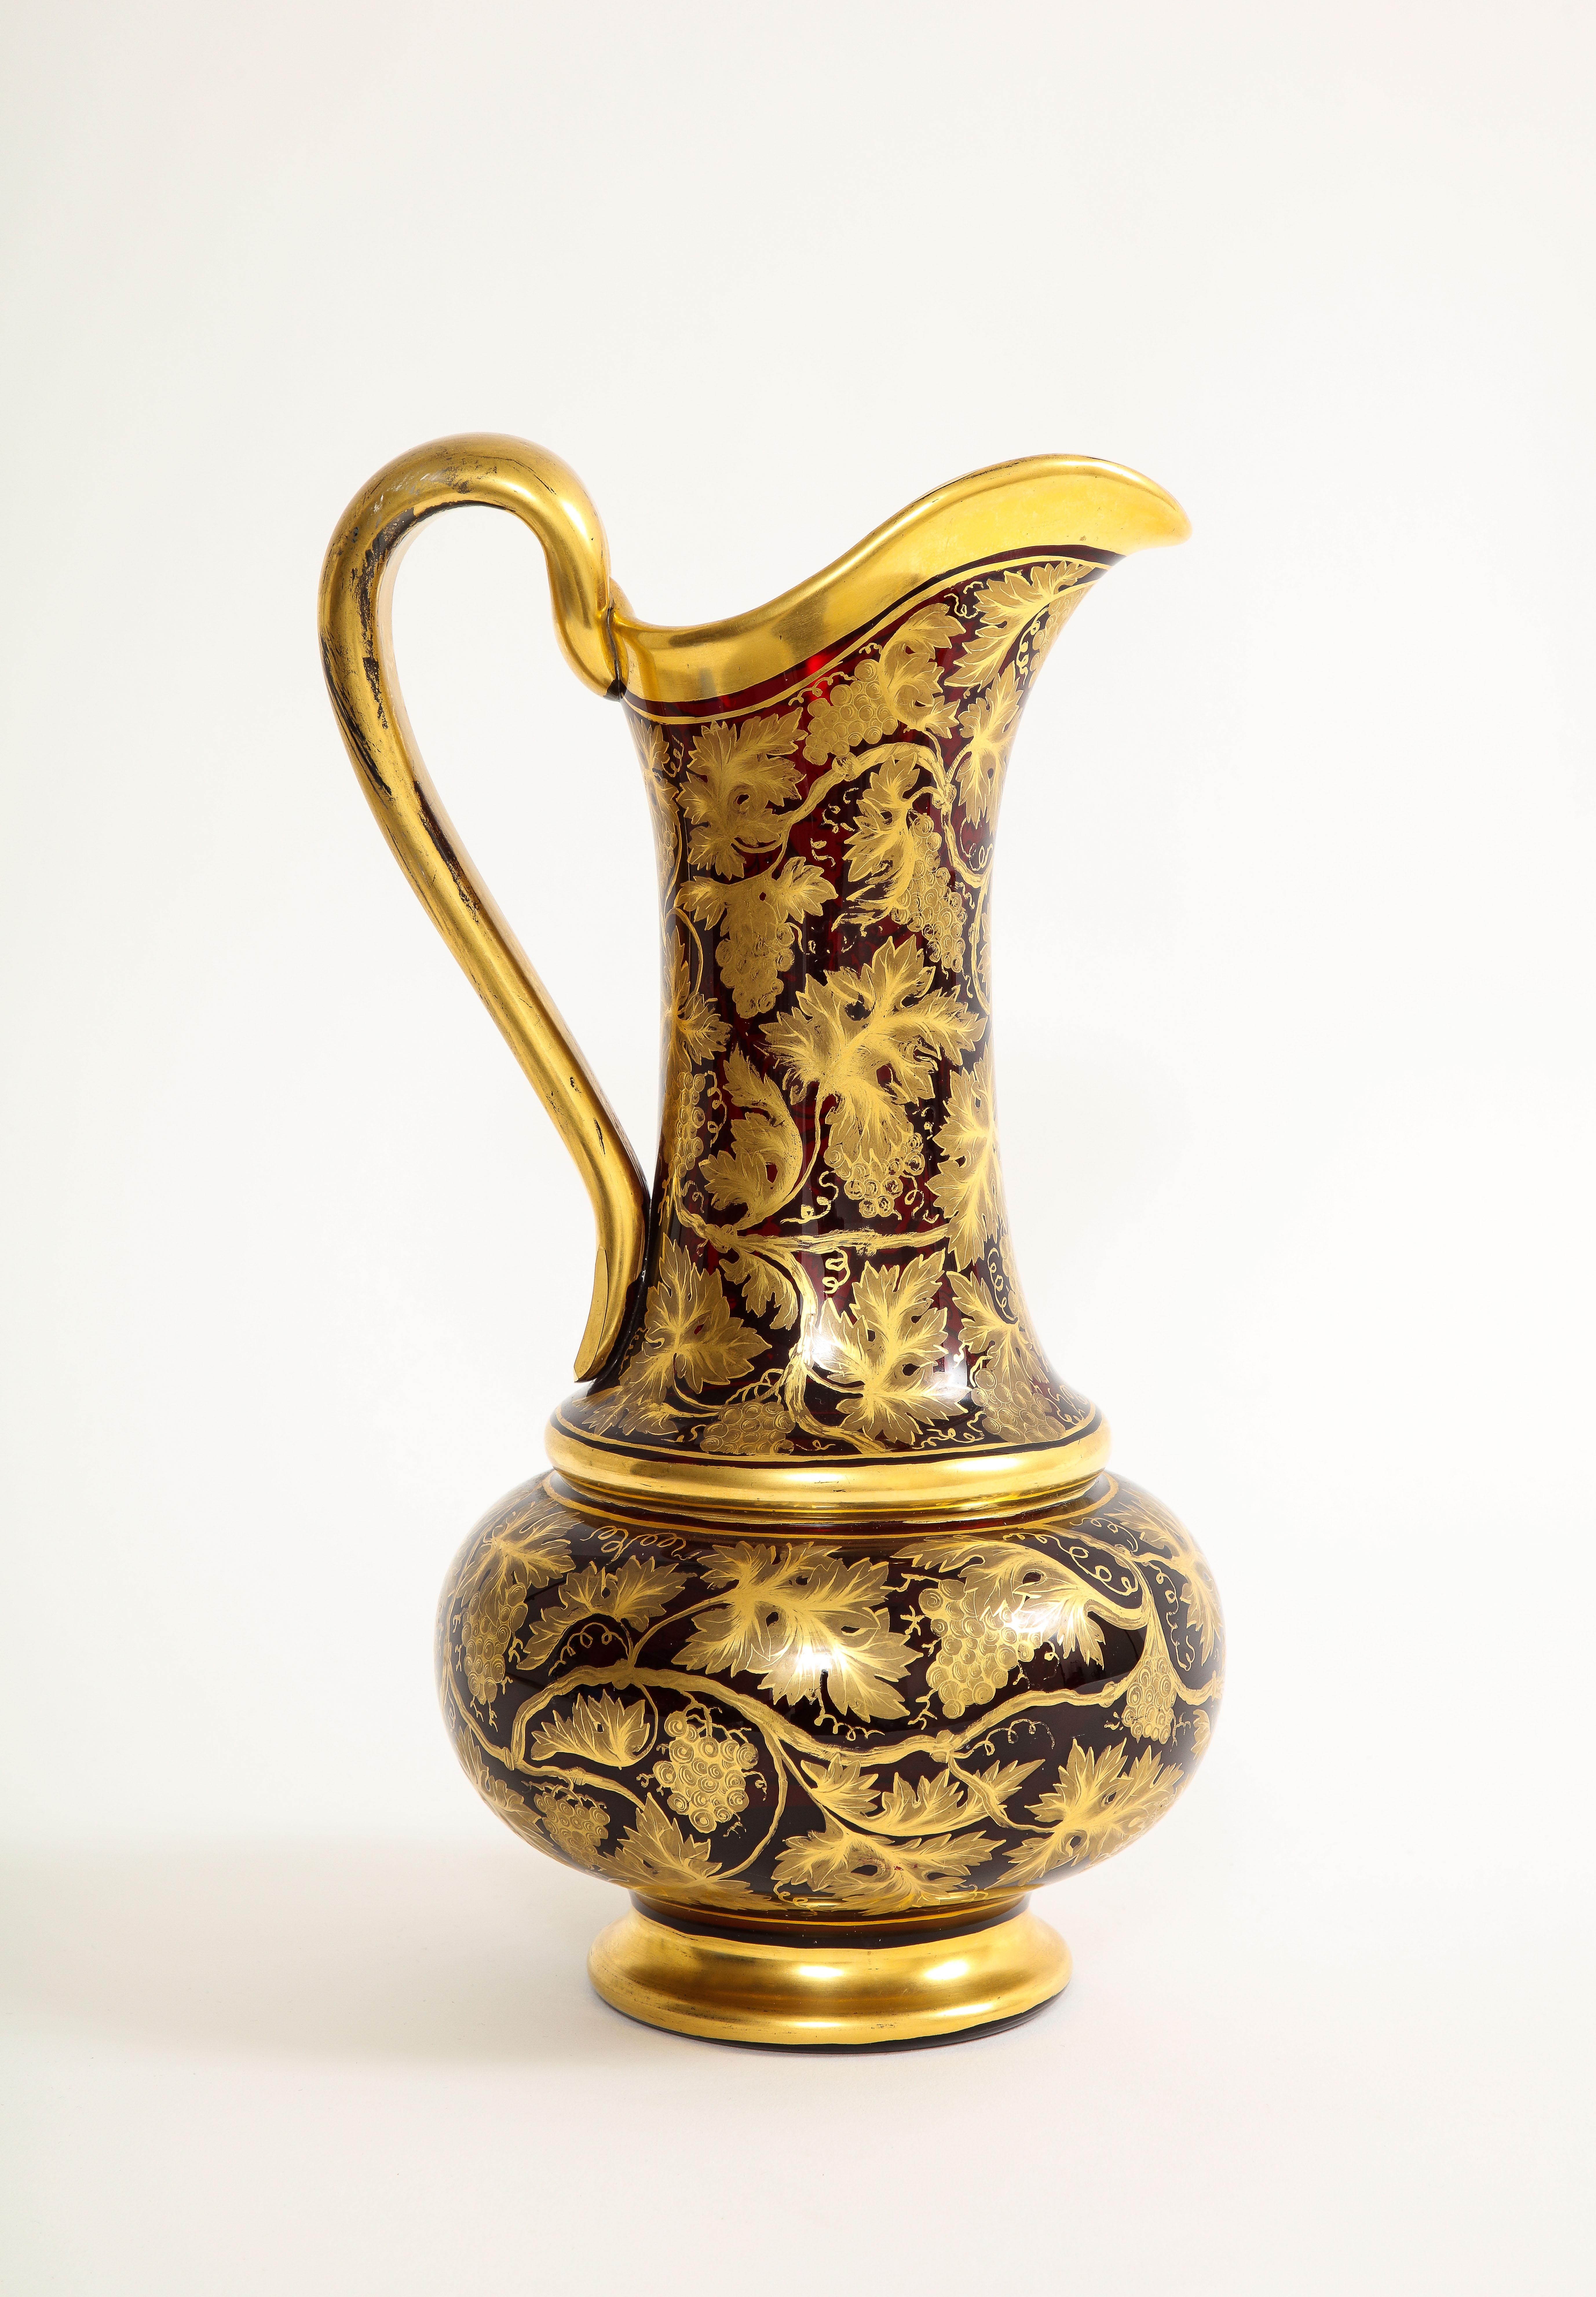 Late 19th Century Marvelous 19th Century Bohemian Red Crystal & 24k Gold Decorated Ewer For Sale